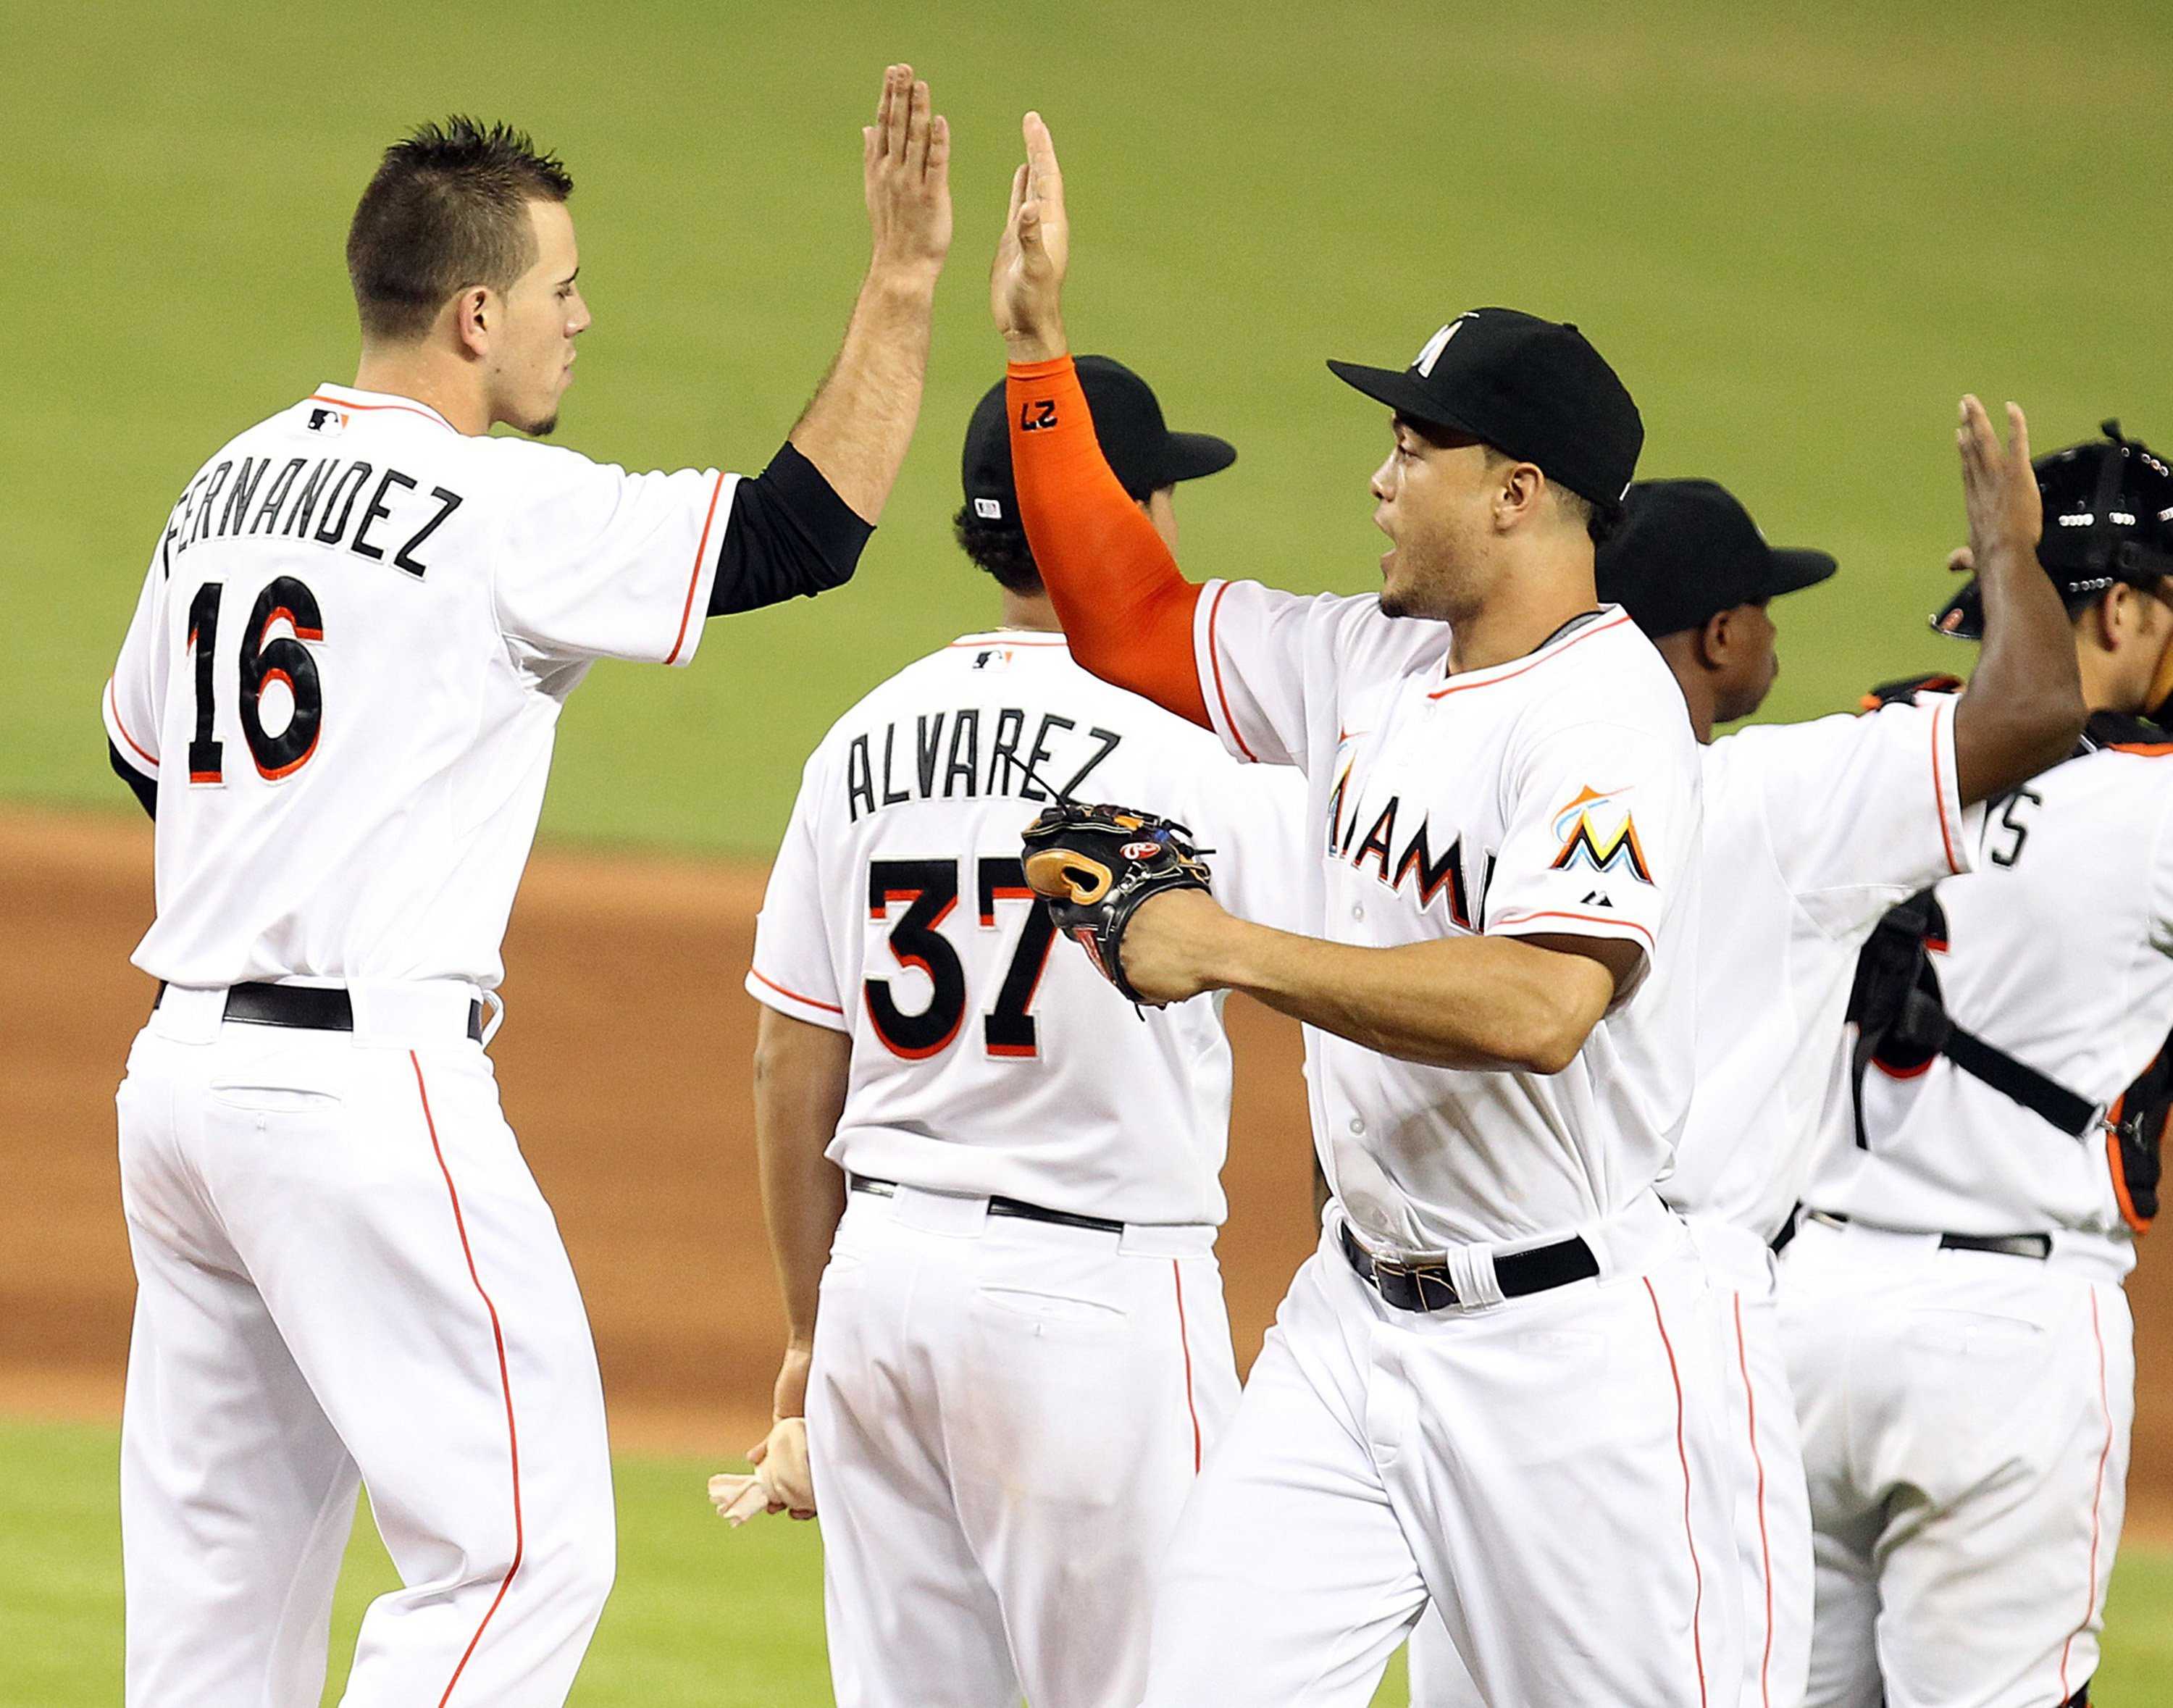 Miami baseball players high-five one another